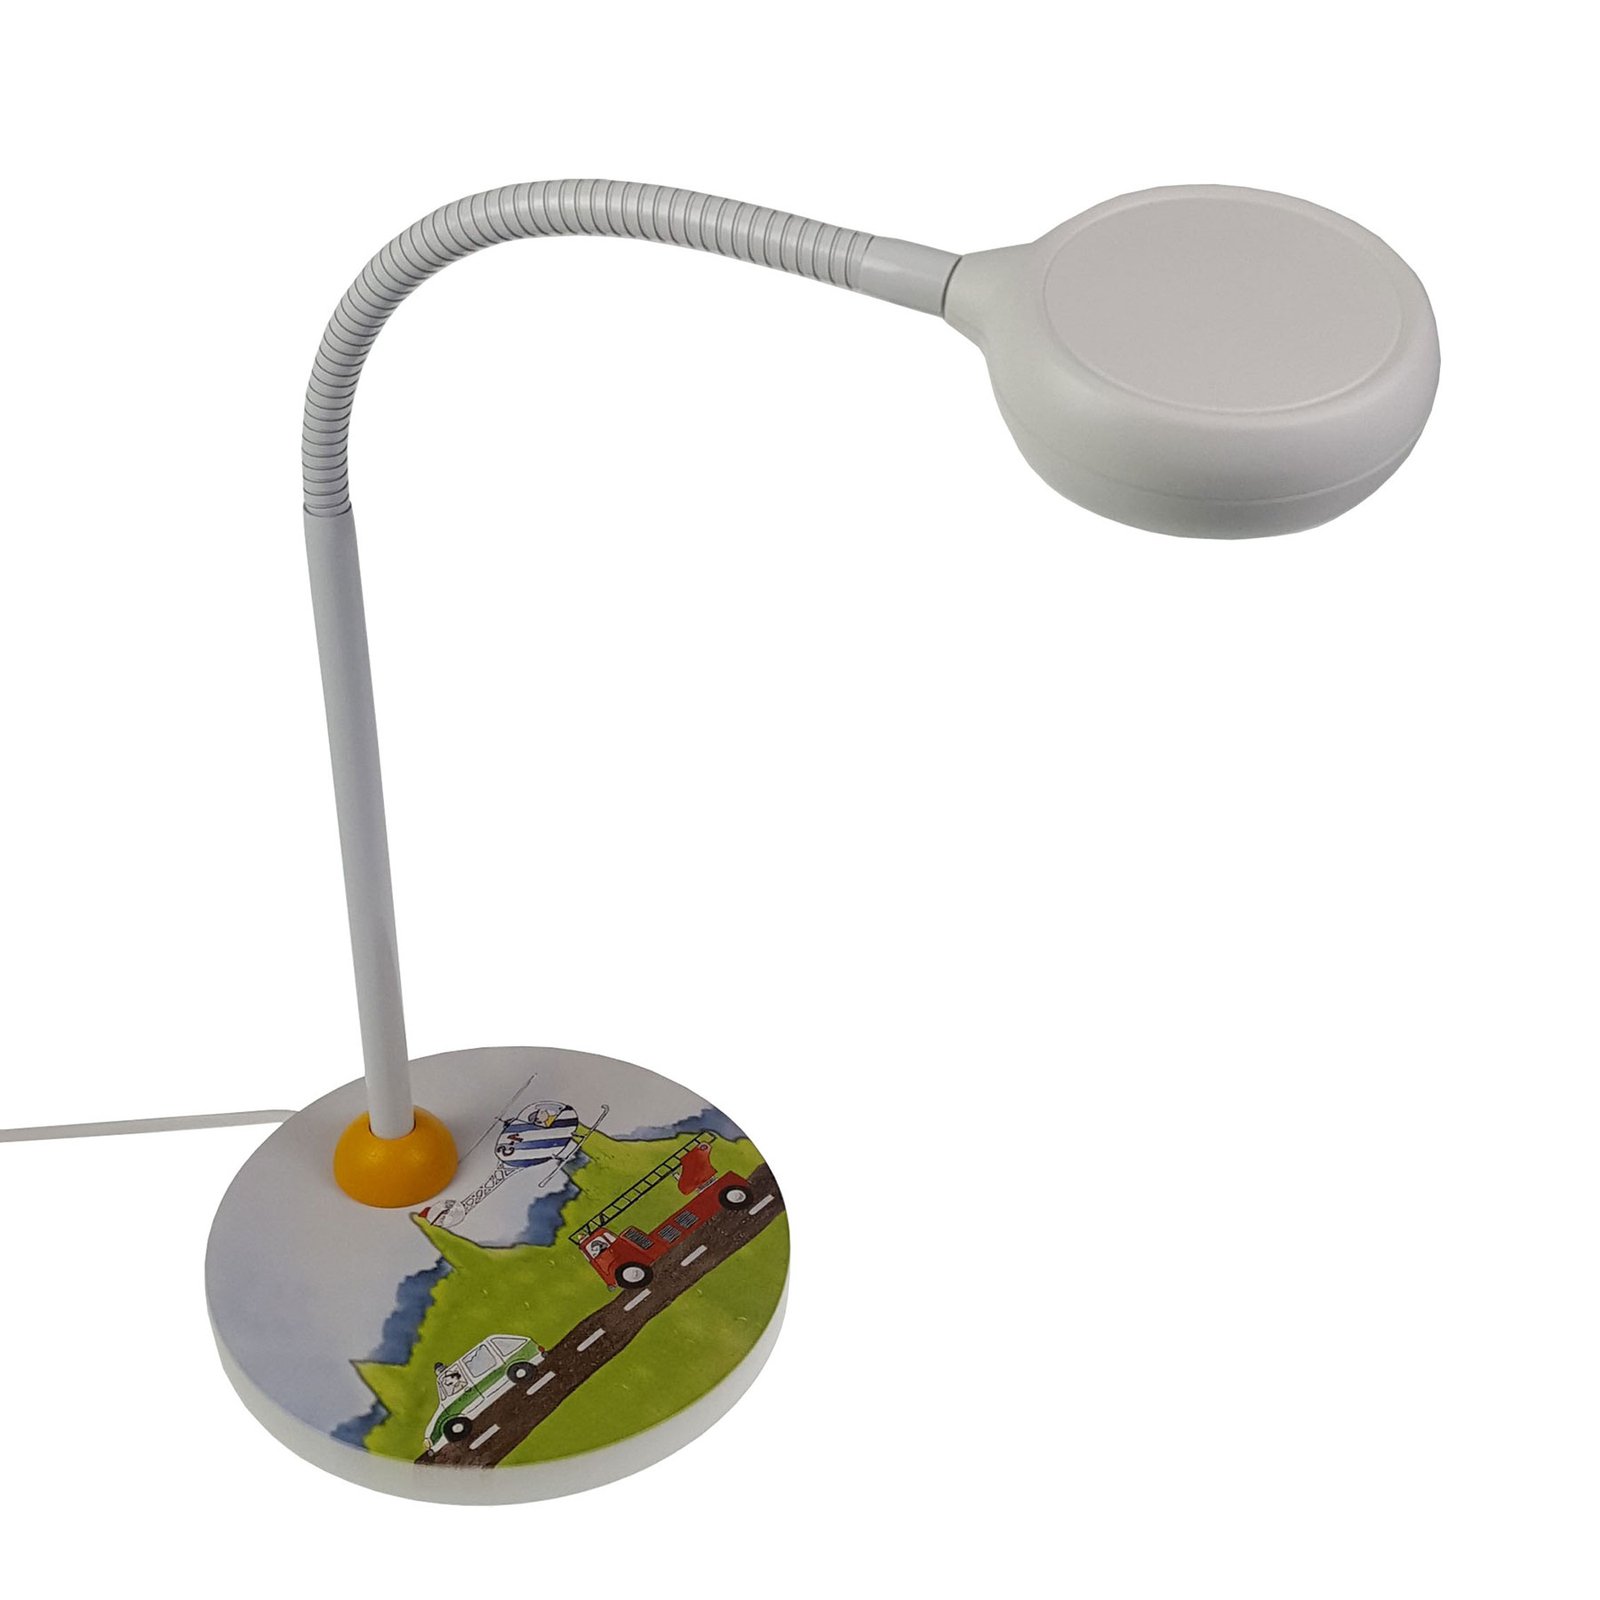 Cars table lamp with a flexible arm